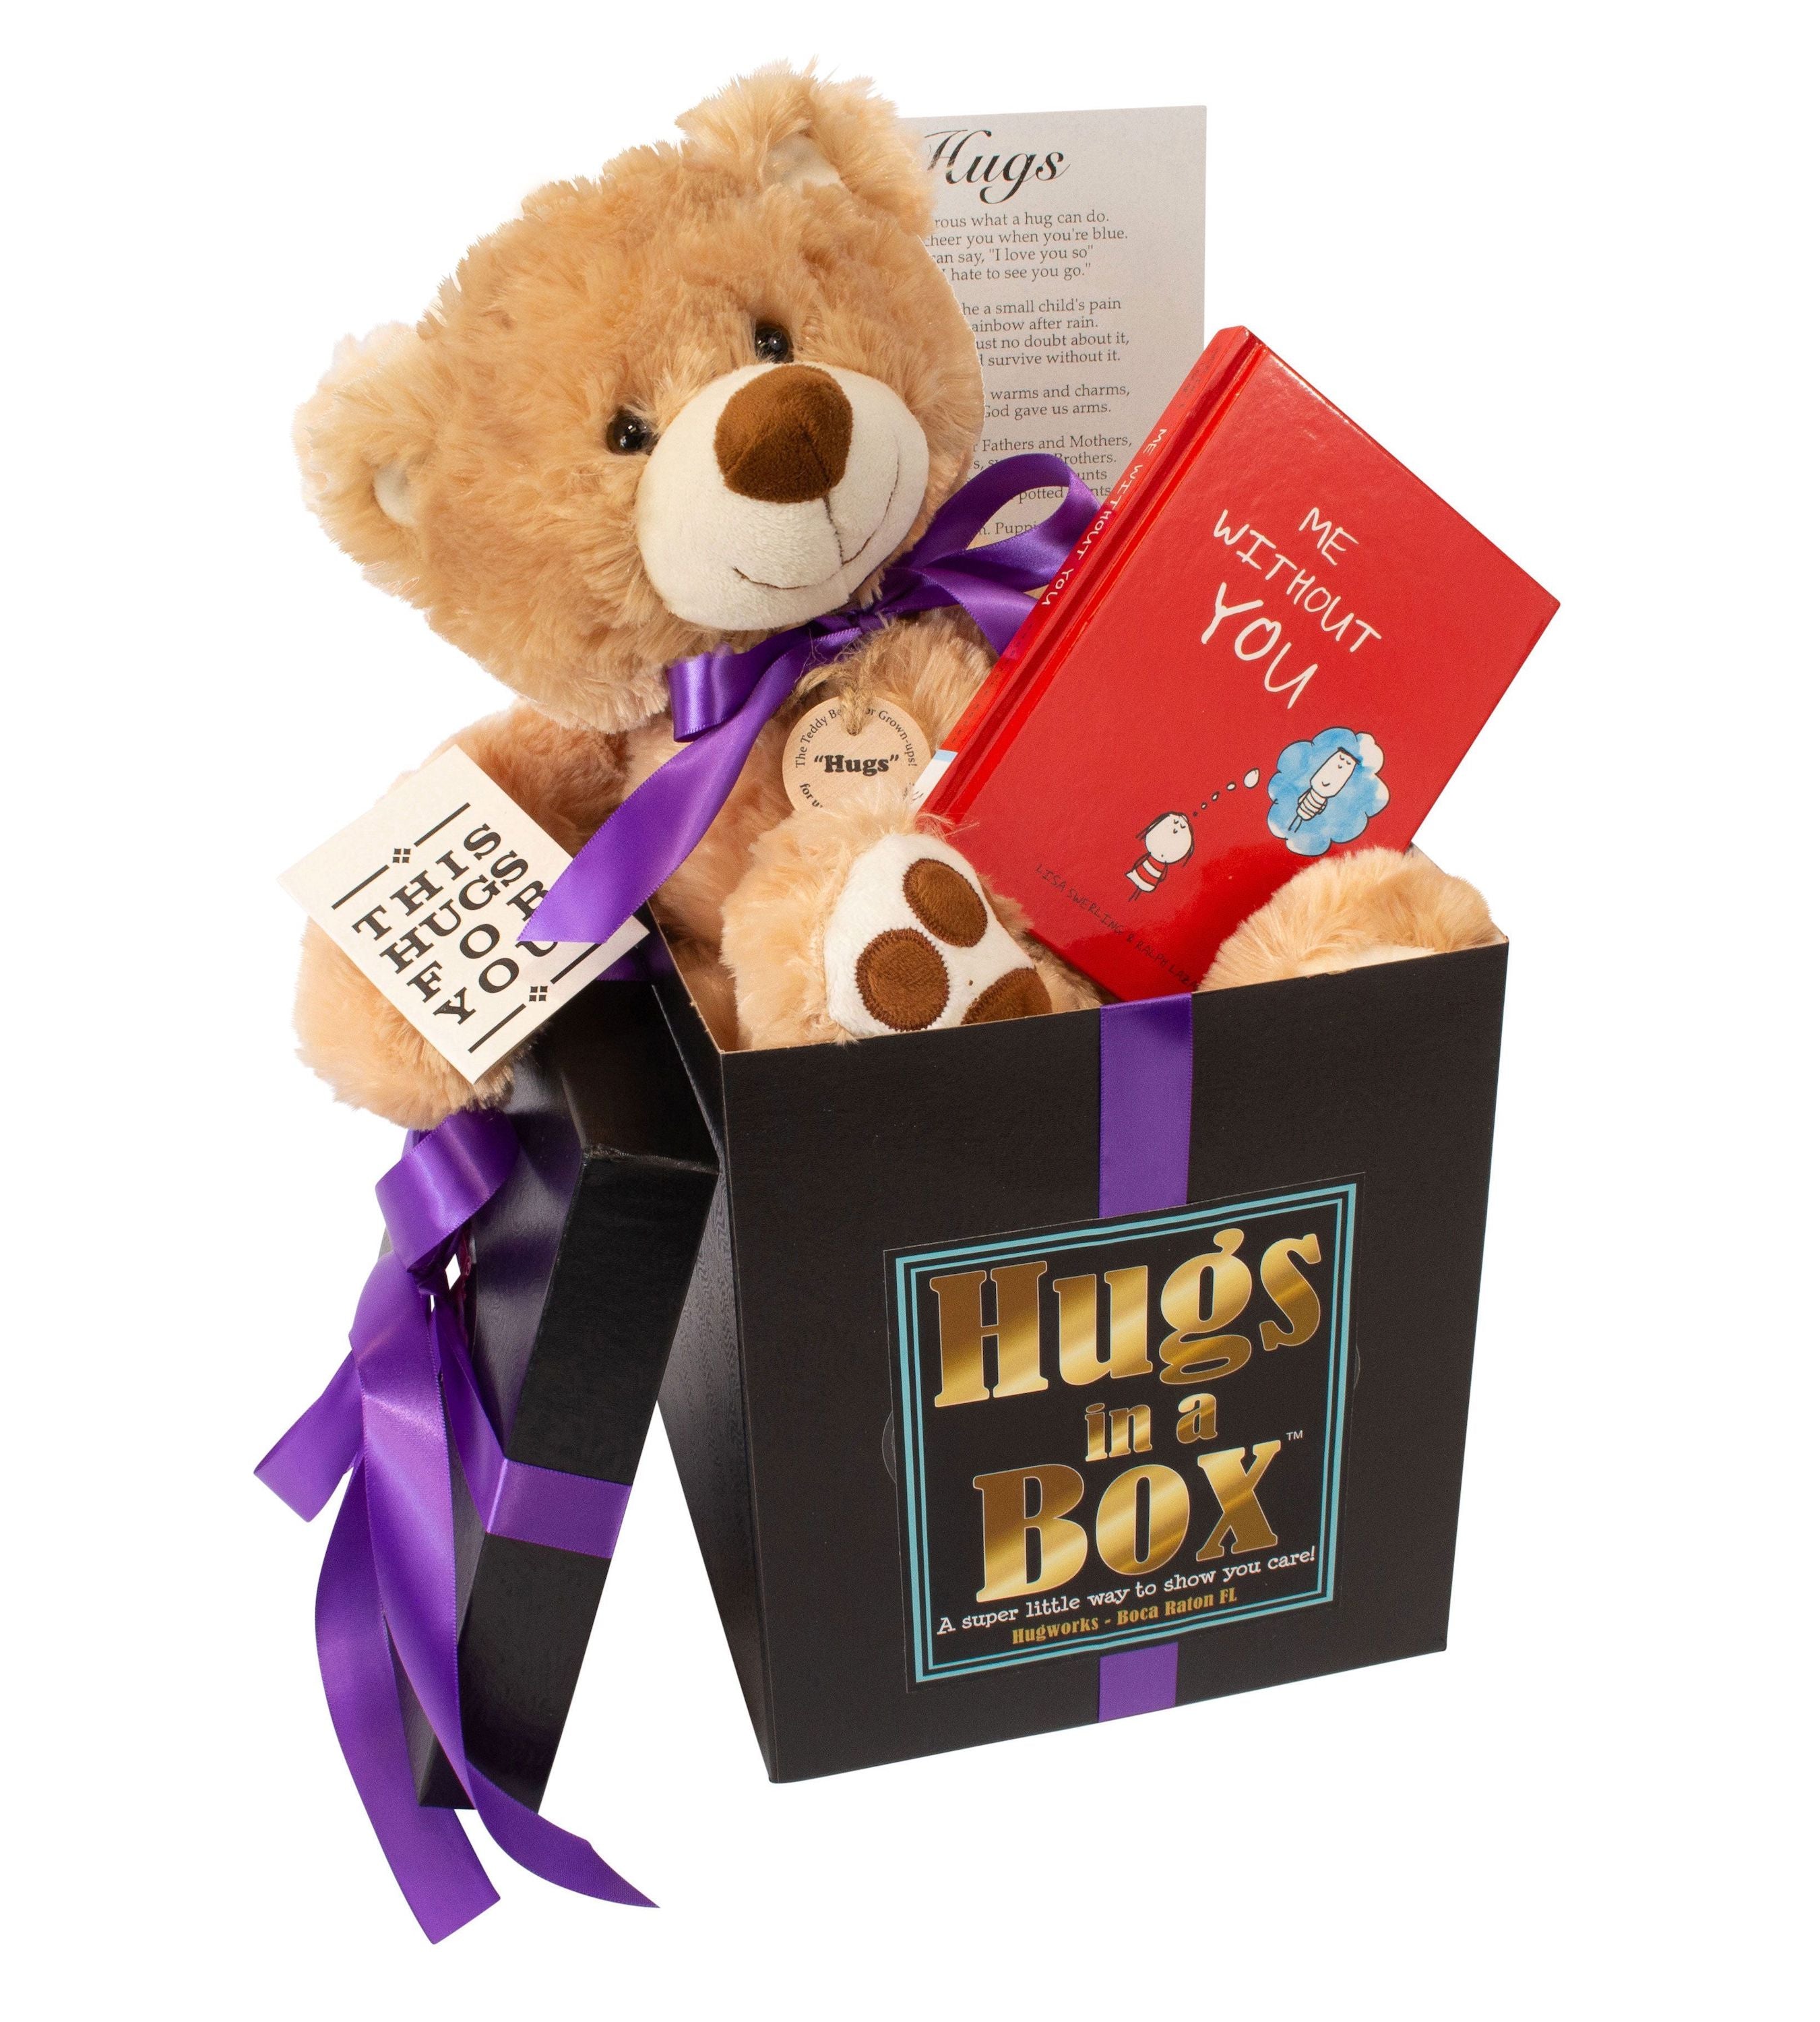 Gifts for Women - the Hug Box